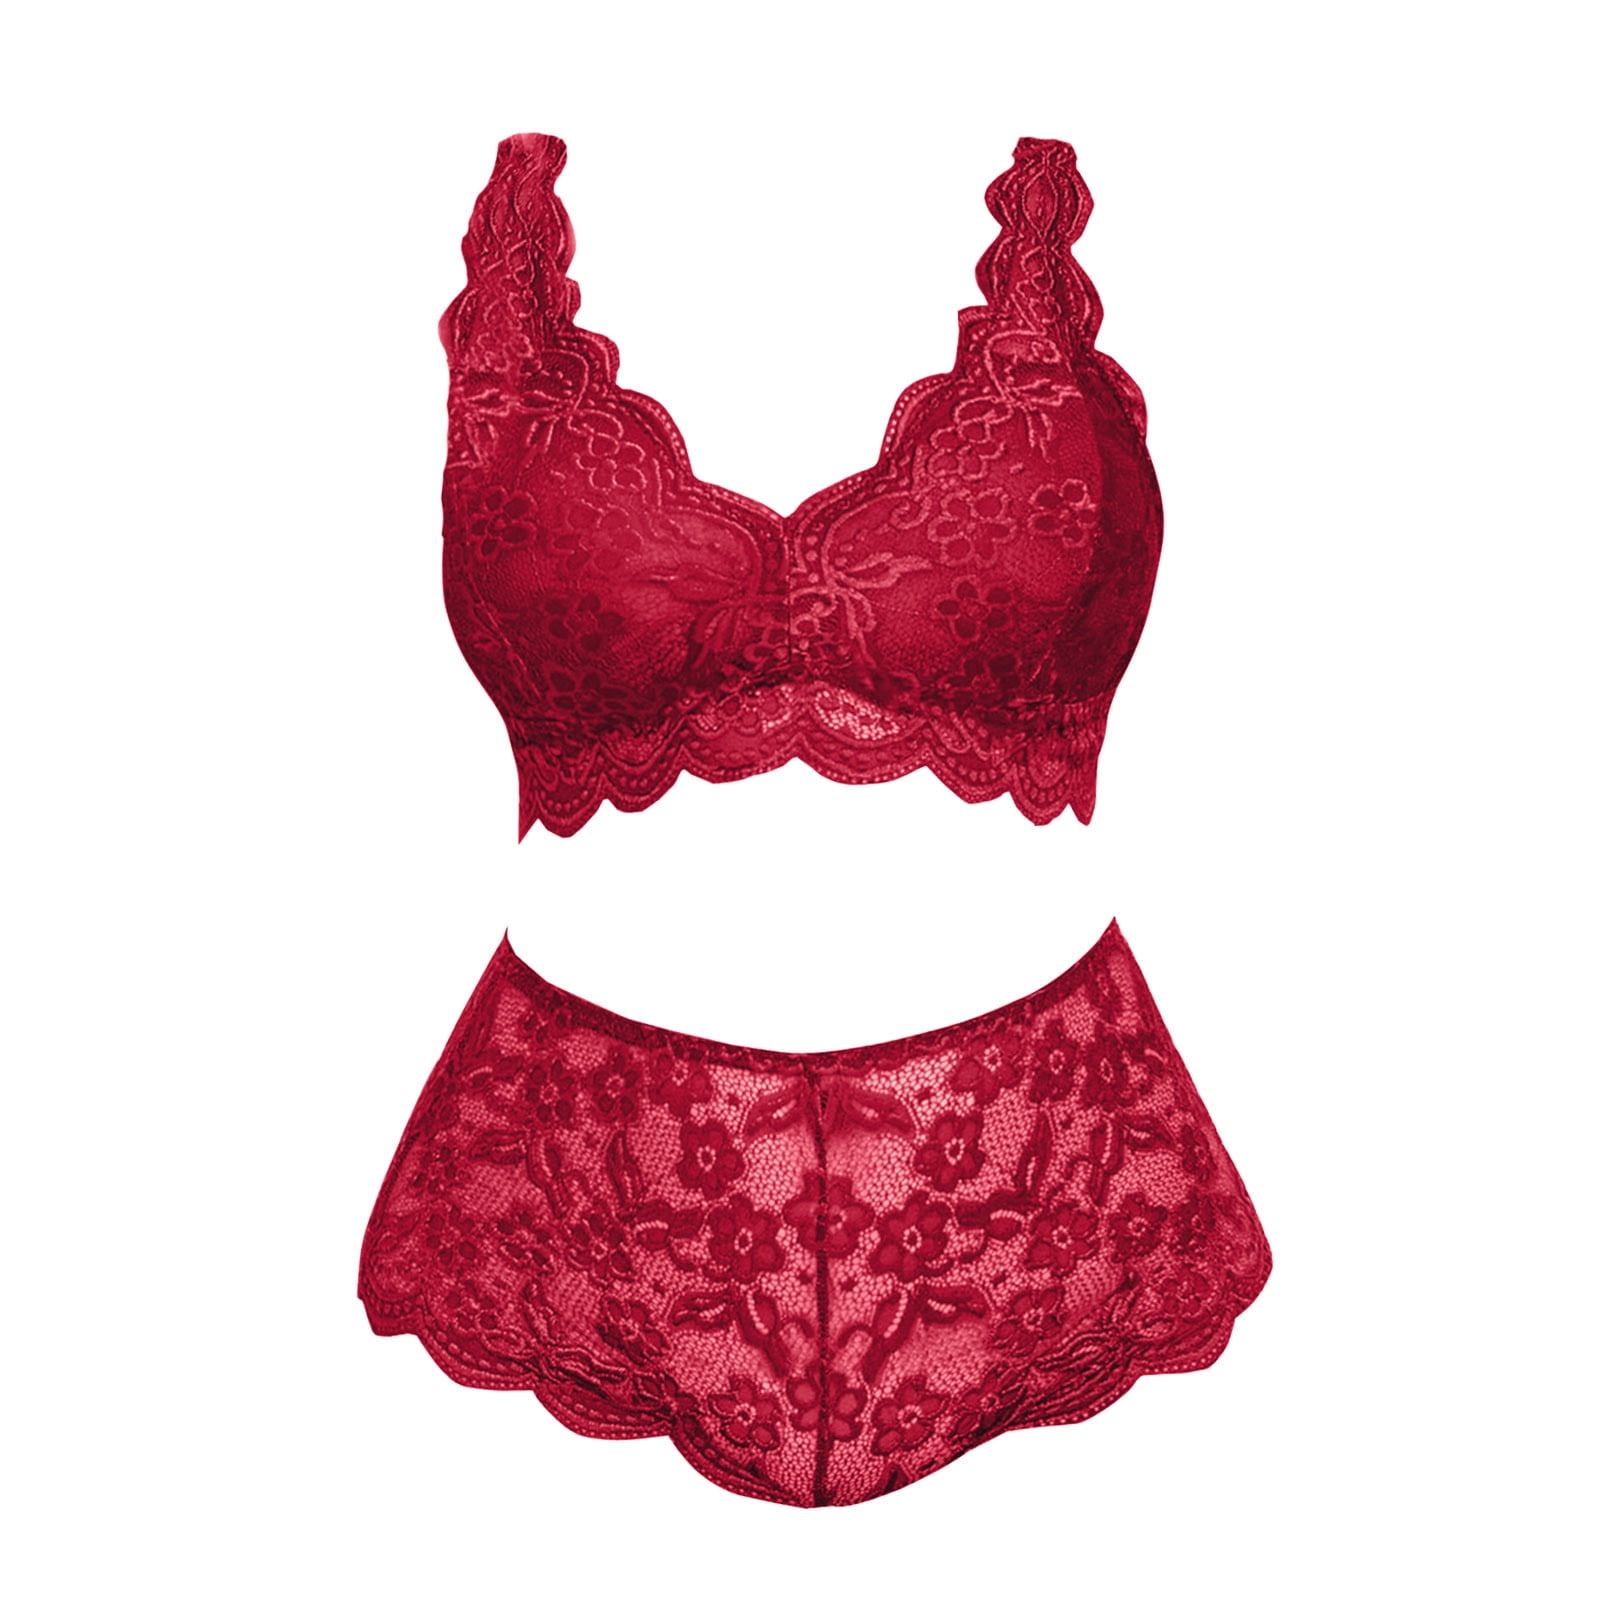 Pretty Panties Red Lace Lingerie Calculating Bra Size Best Briefs for Men  Most Comfortable Mens Underwear Plus Size Bra S-Ale Mens Underwear S-Ale  Ruffle Panties Blue Bras Sports Bras For Women High 